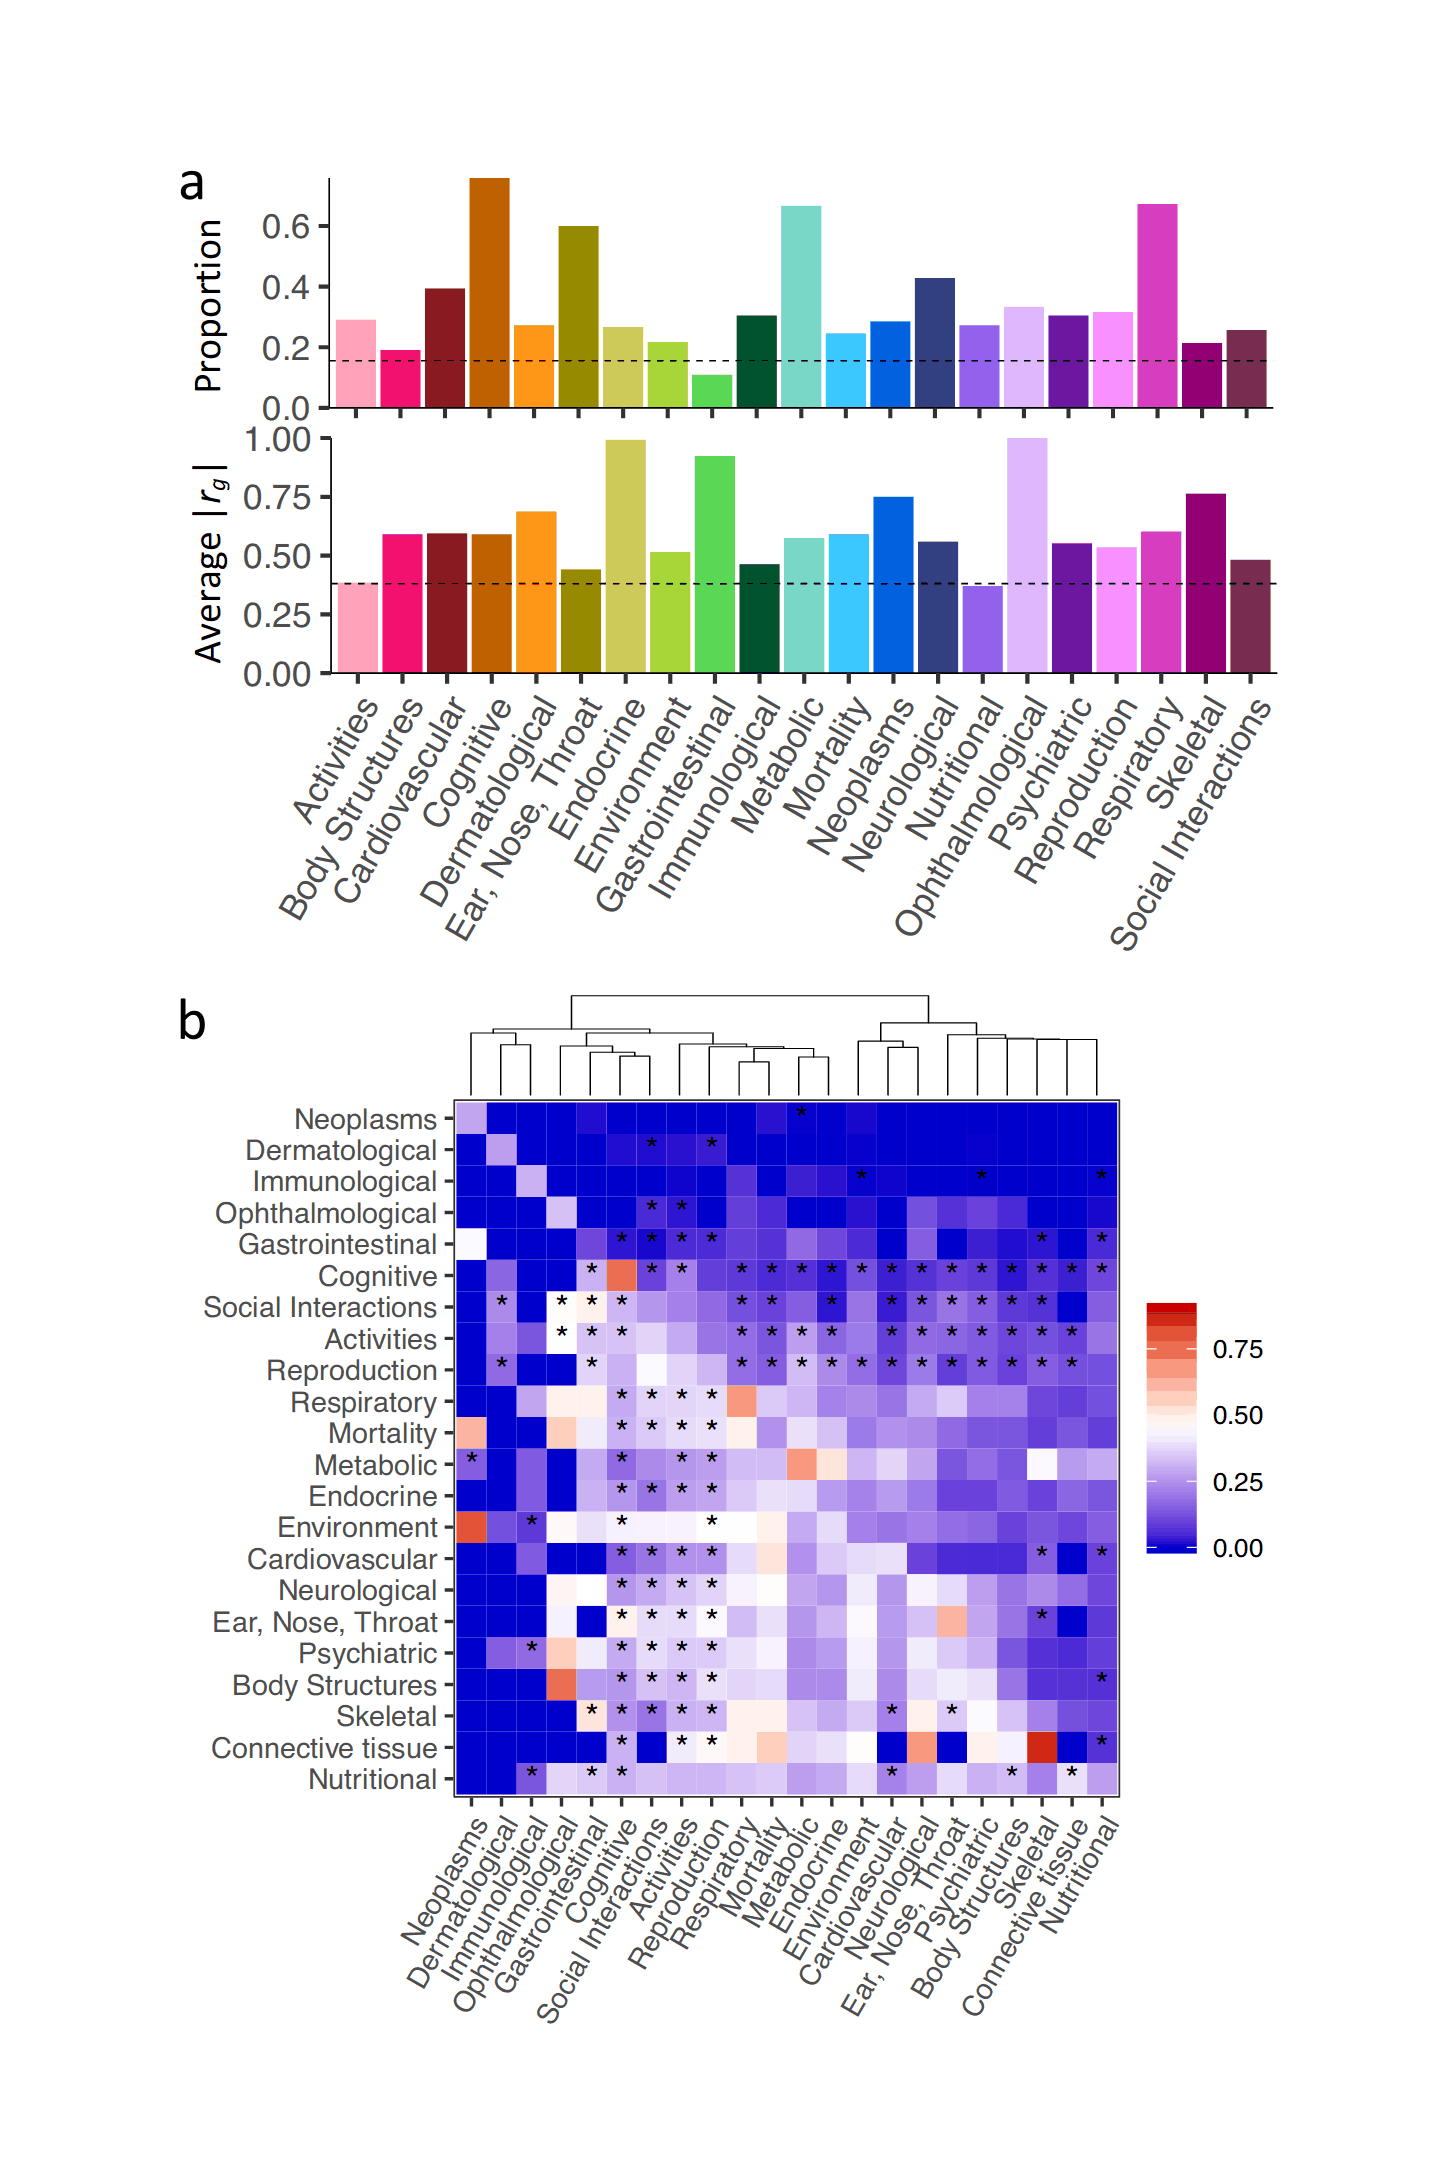 Watanabe et al 2018: “Fig. 2. Within and between domains genetic correlations. (a.) Proportion of trait pairs with significant rg (top) and average |_rg_| for significant trait pairs (bottom) within domains. Dashed lines represent the proportion of trait pairs with significant rg (top) and average |rg| for significant trait pairs (bottom) across all 558 traits, respectively. Connective tissue, muscular and infection domains are excluded as these each contains less than 3 traits. (b.) Heatmap of proportion of trait pairs with significant rg (upper right triangle) and average |rg| for significant trait pairs (lower left triangle) between domains. Connective tissue, muscular and infection domains are excluded as each contains less than 3 traits. The diagonal represents the proportion of trait pairs with significant rg within domains. Stars denote the pairs of domains in which the majority (>50%) of significant rg are negative.”